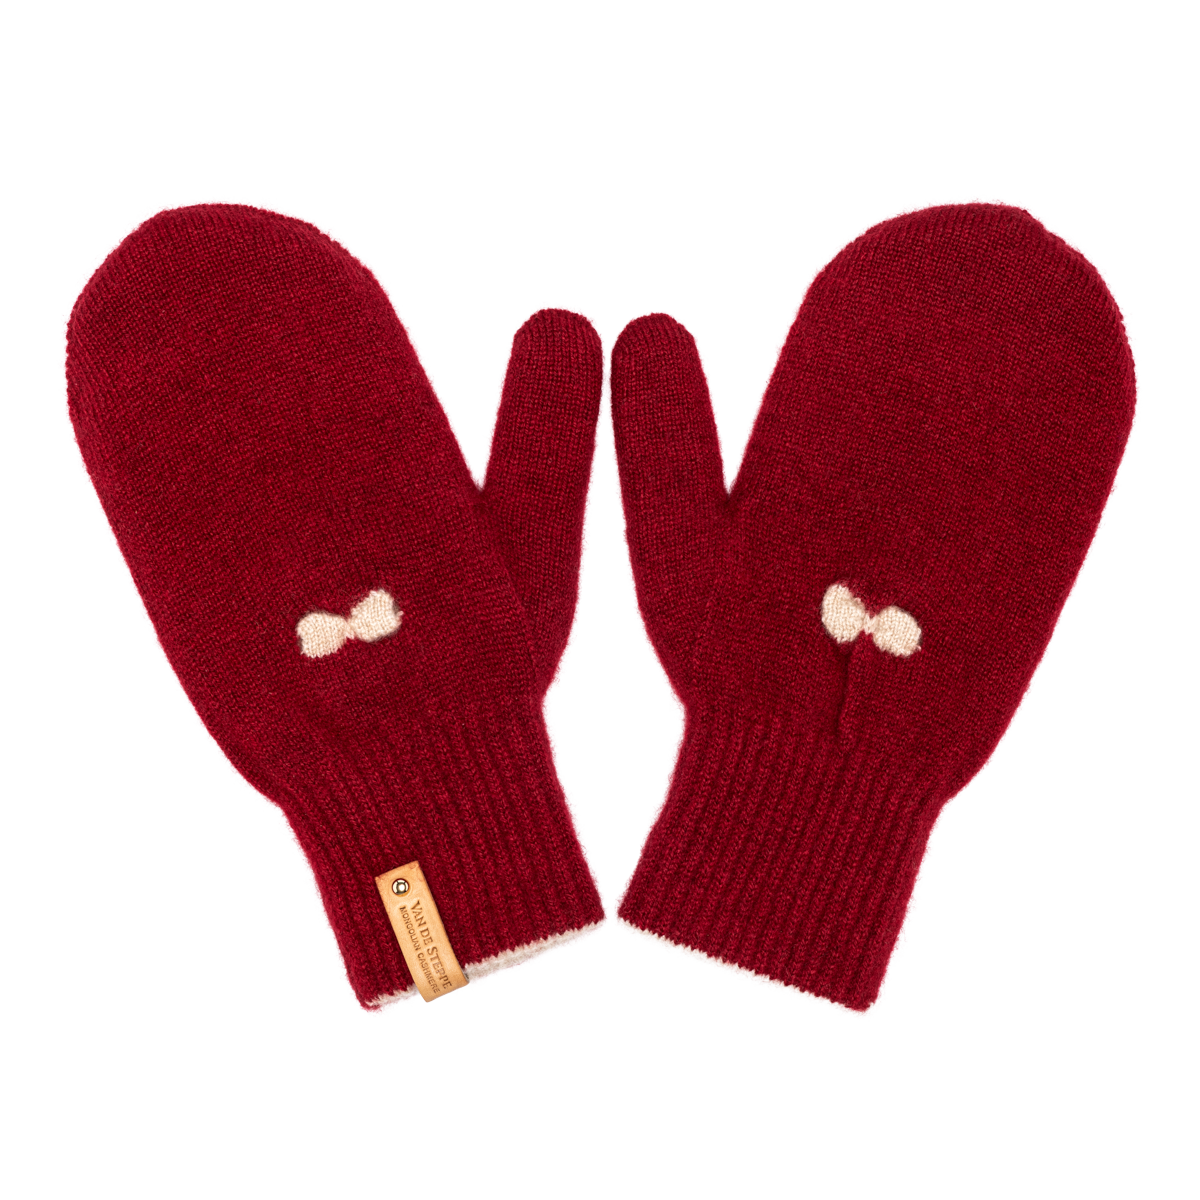 "Nomin" Cashmere Mittens